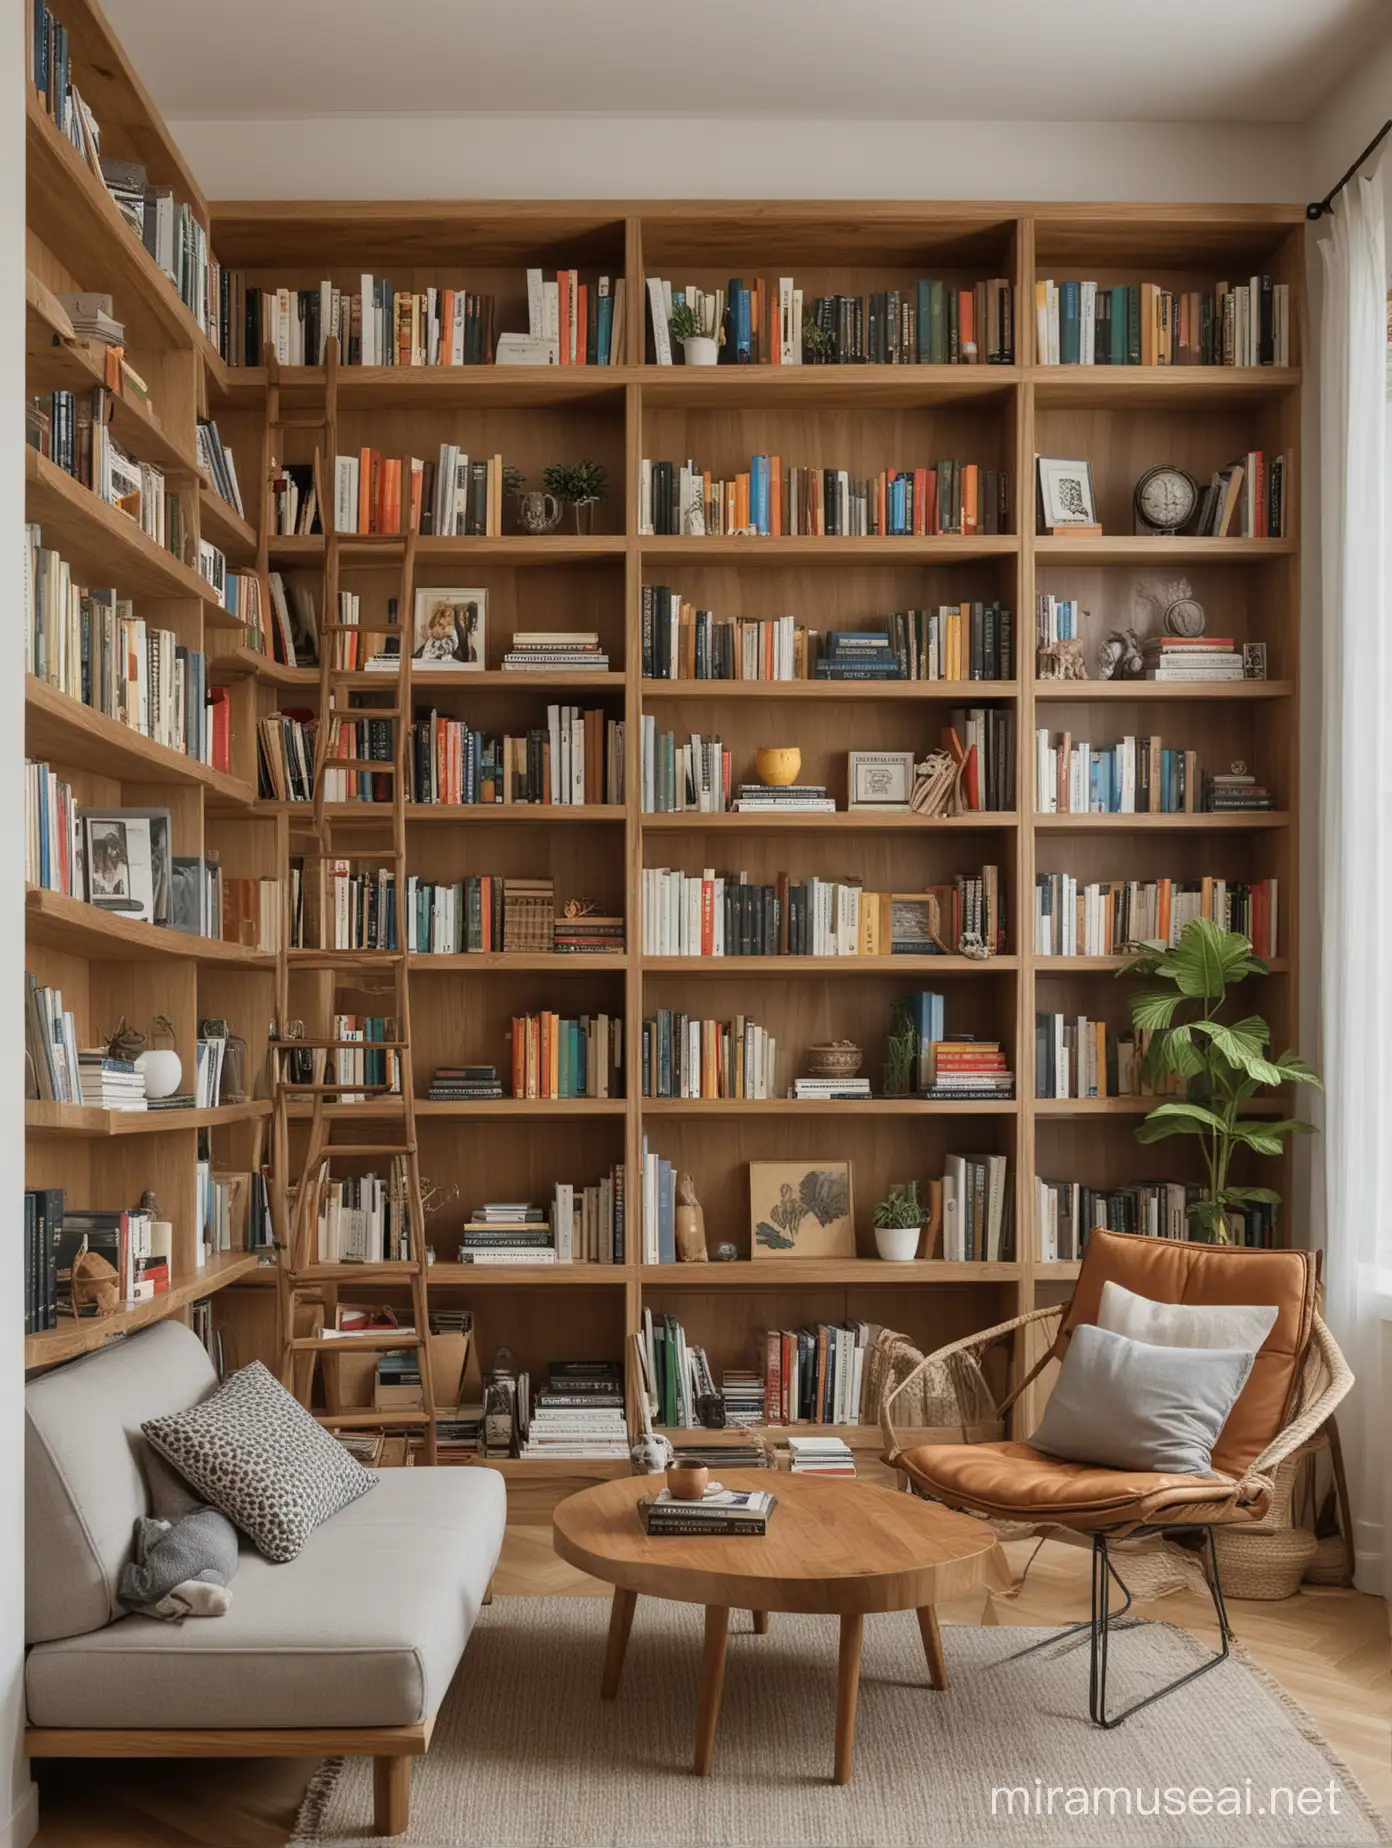 On one side of the family corner, there is a large bookshelf filled with various books and decorations, adding a touch of cultural atmosphere to the space, allowing people to relax and contemplate while reading.